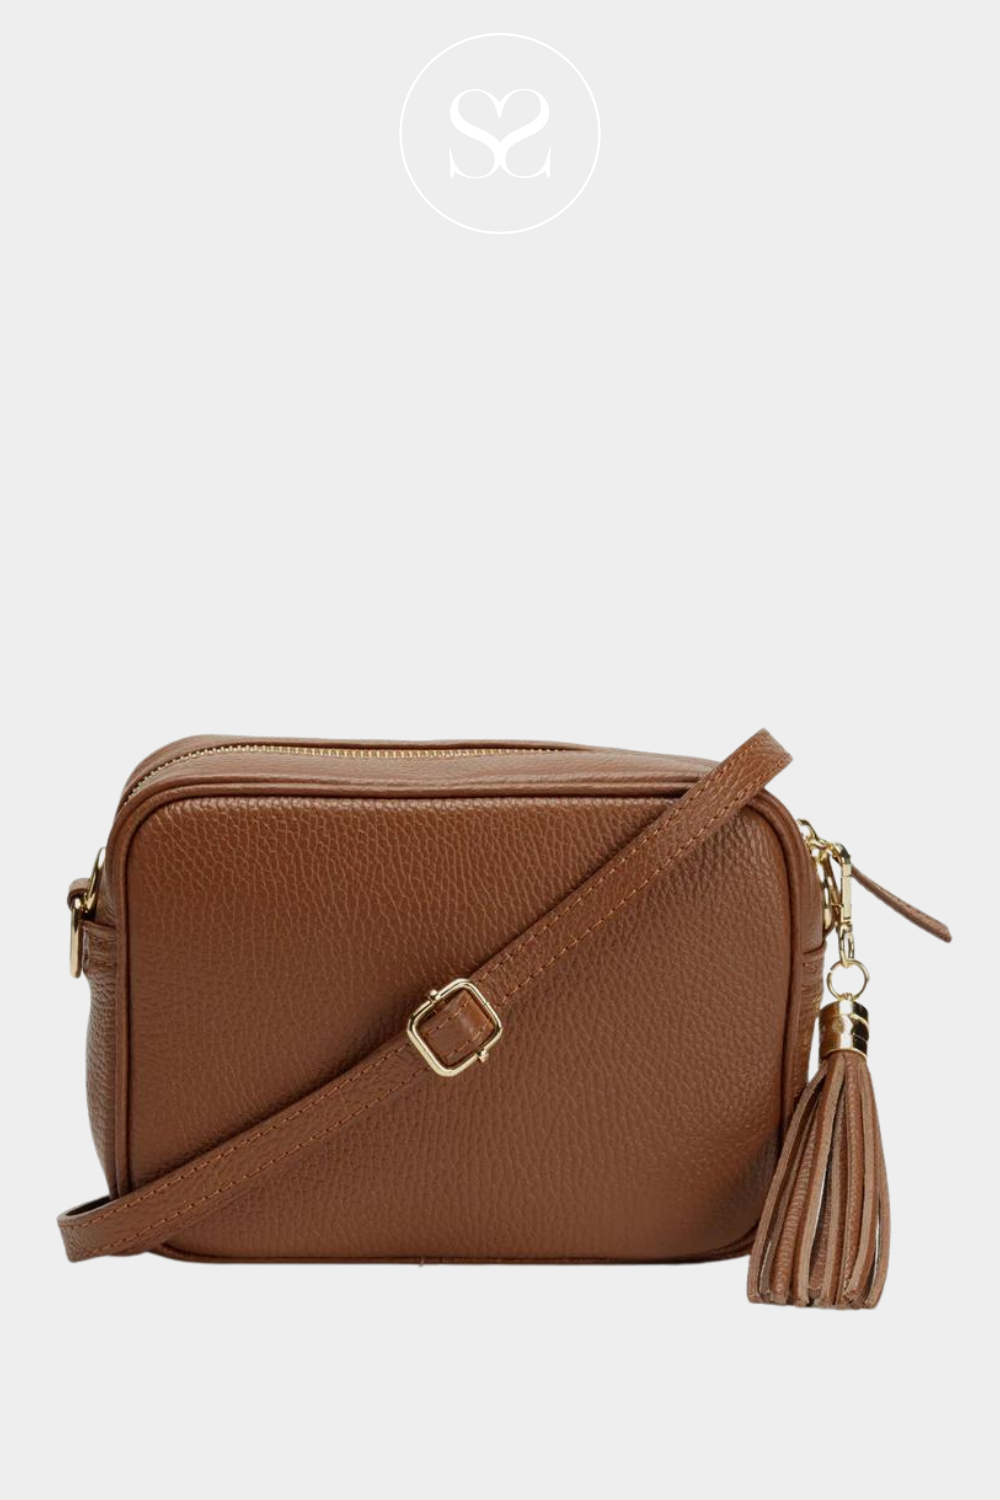 Elie Beaumont Brown Leather Crossbody Bag